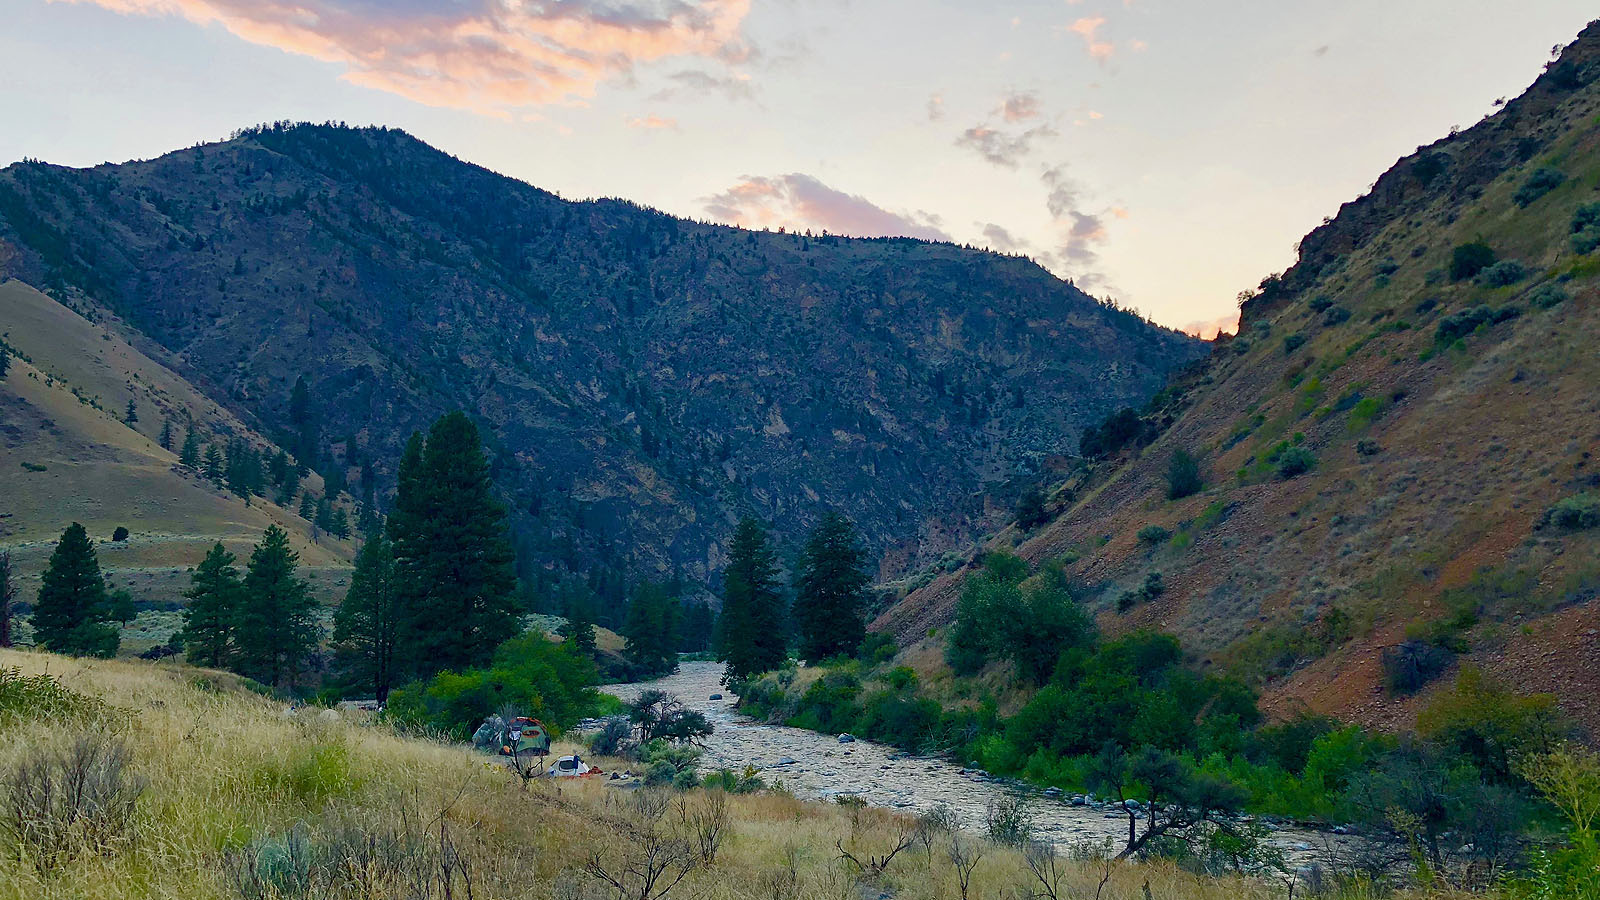 River camp along the Middle Fork of the Salmon River in Idaho